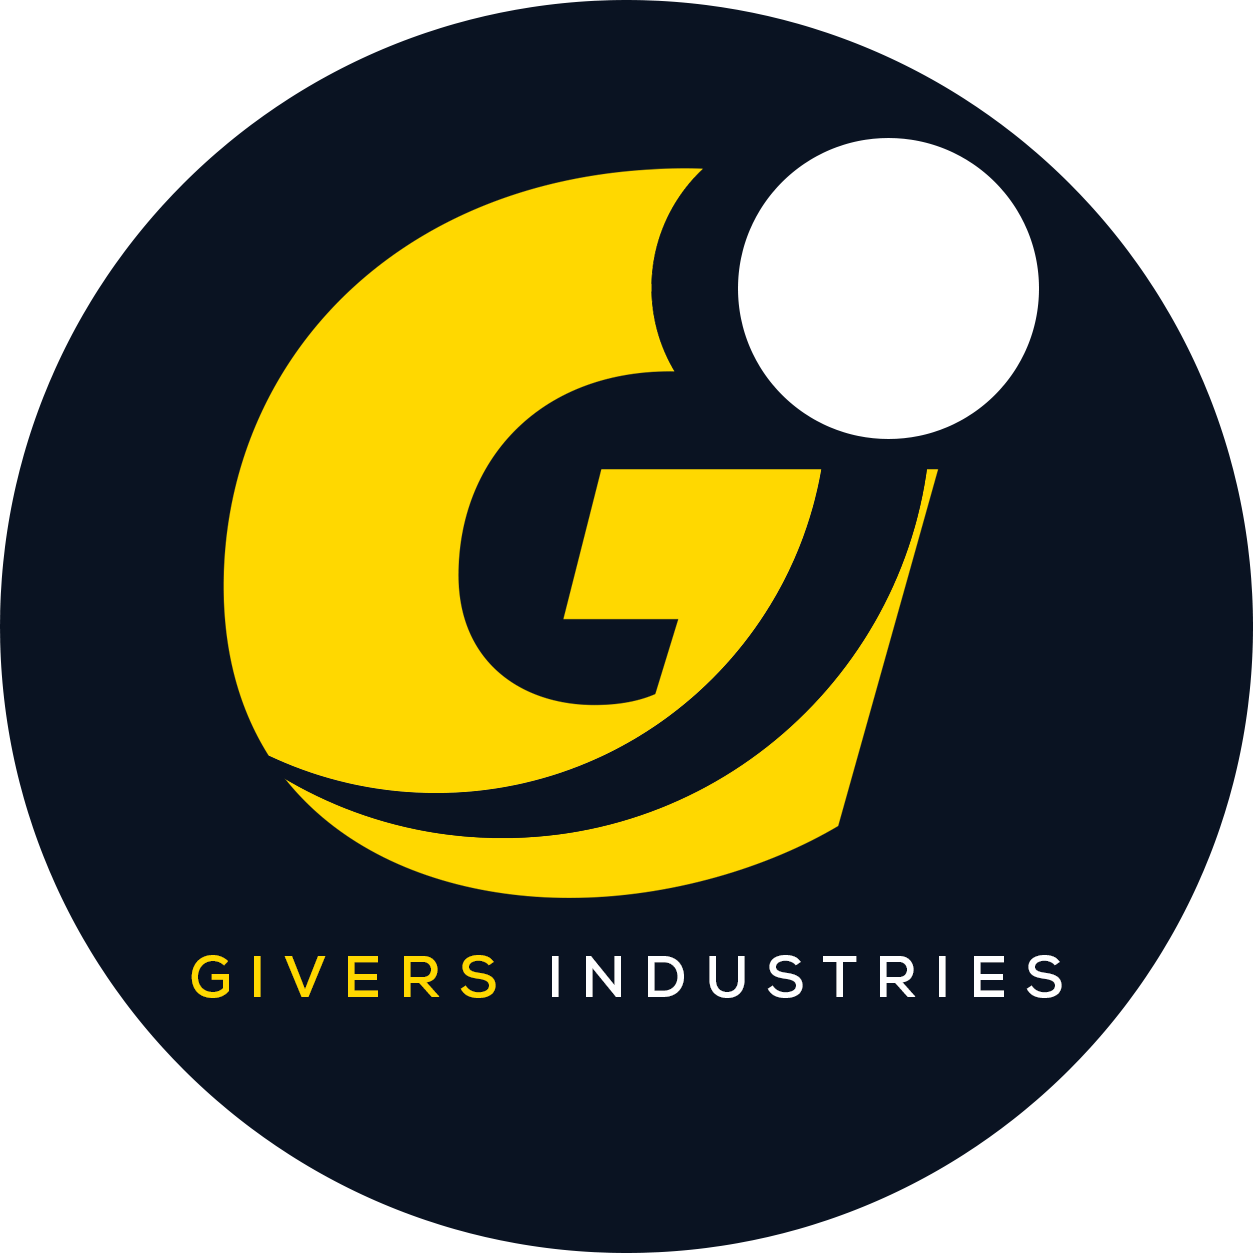 Givers Industries Ltd.